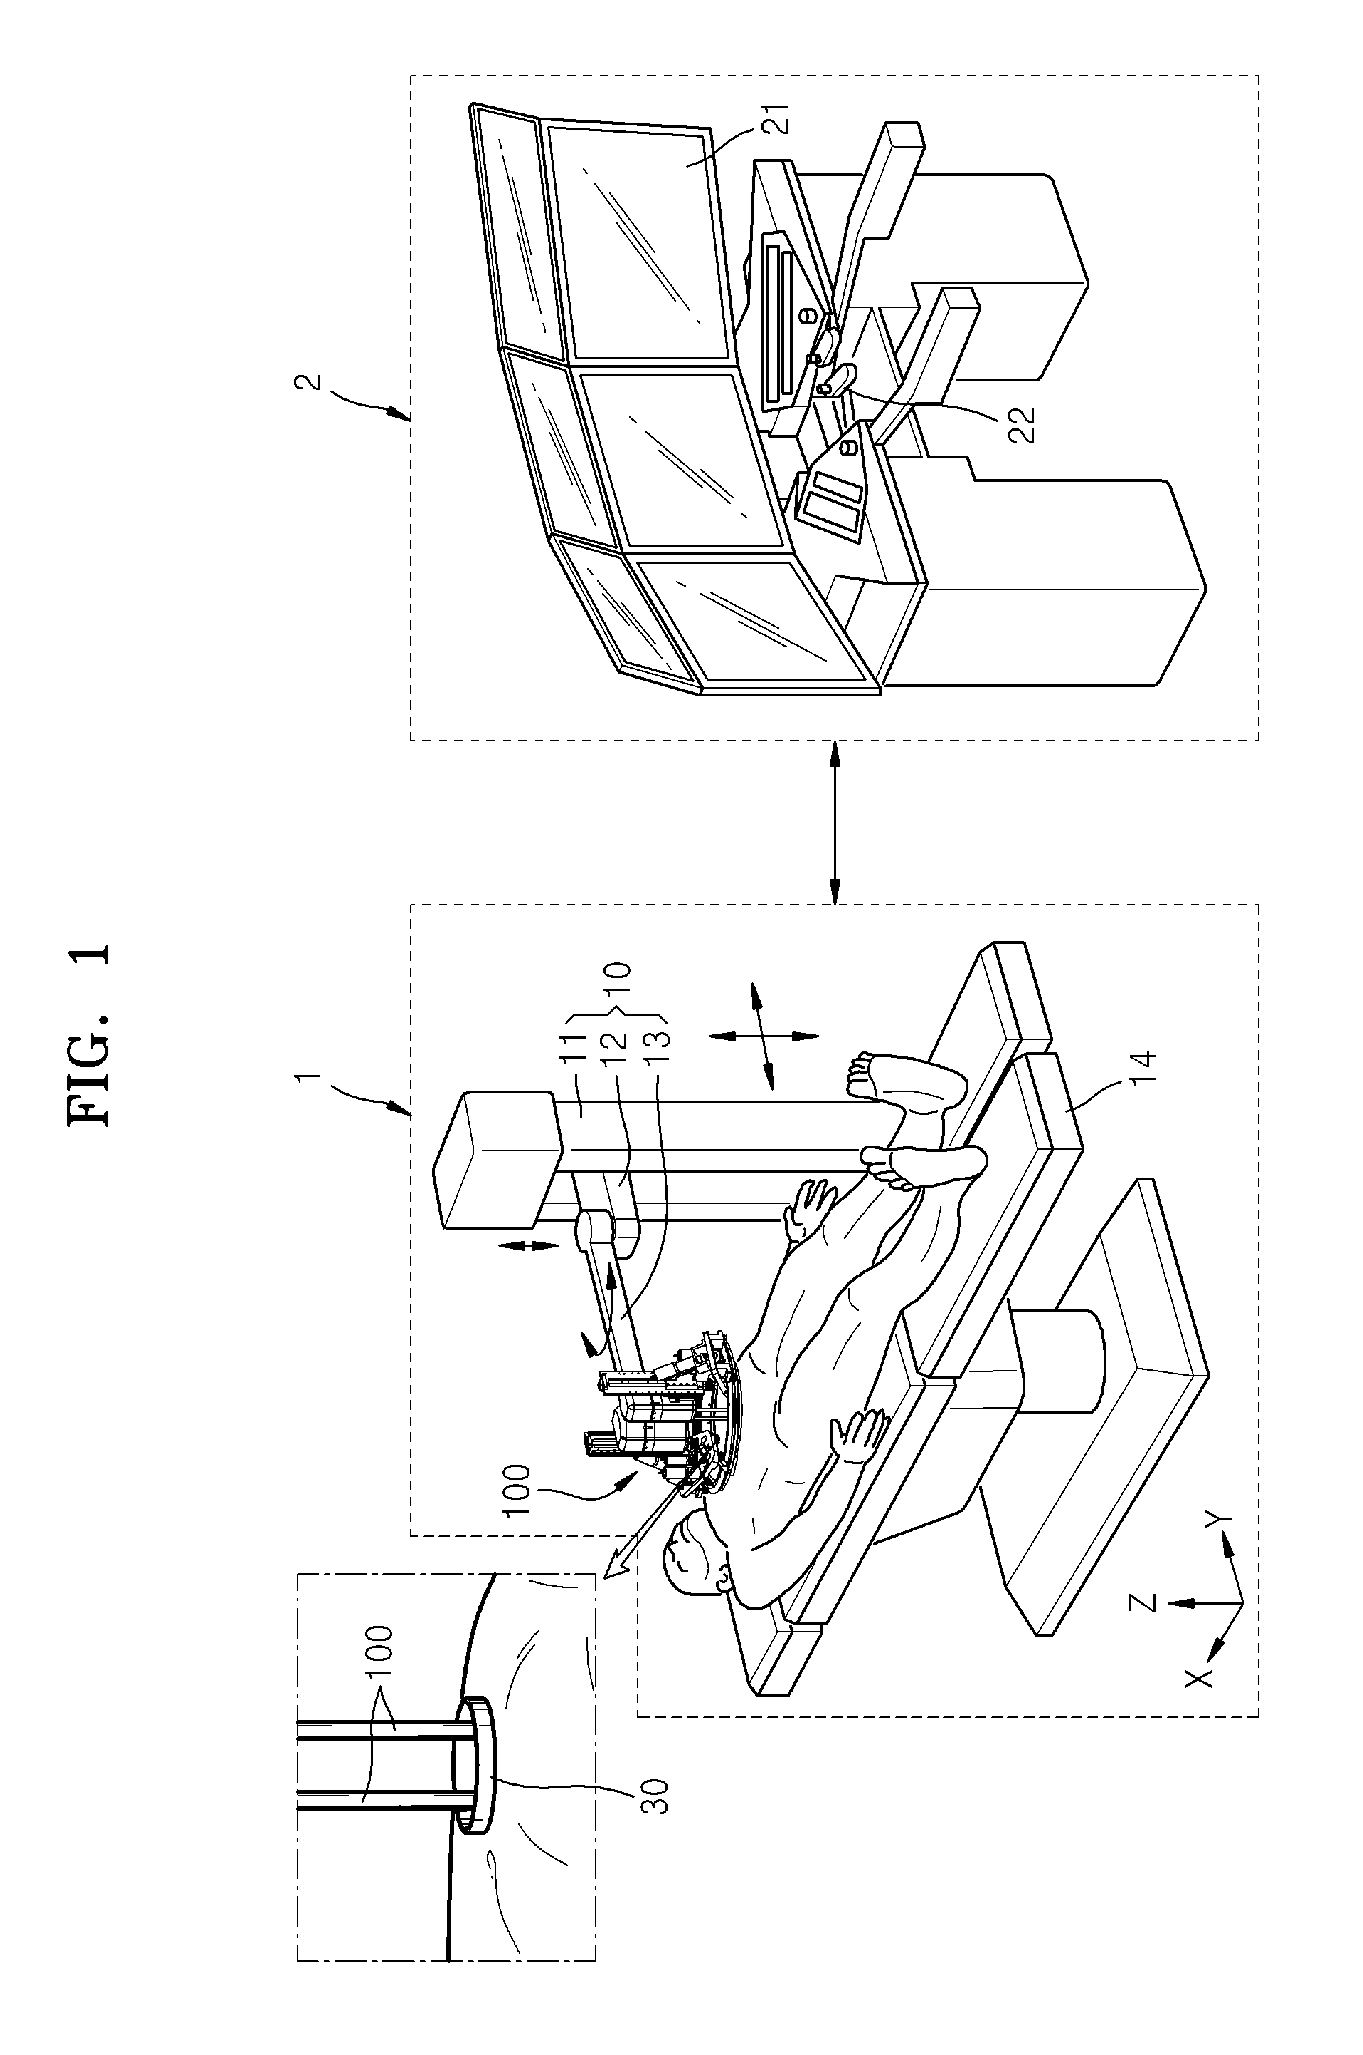 Surgical instrument, support equipment, and surgical robot system